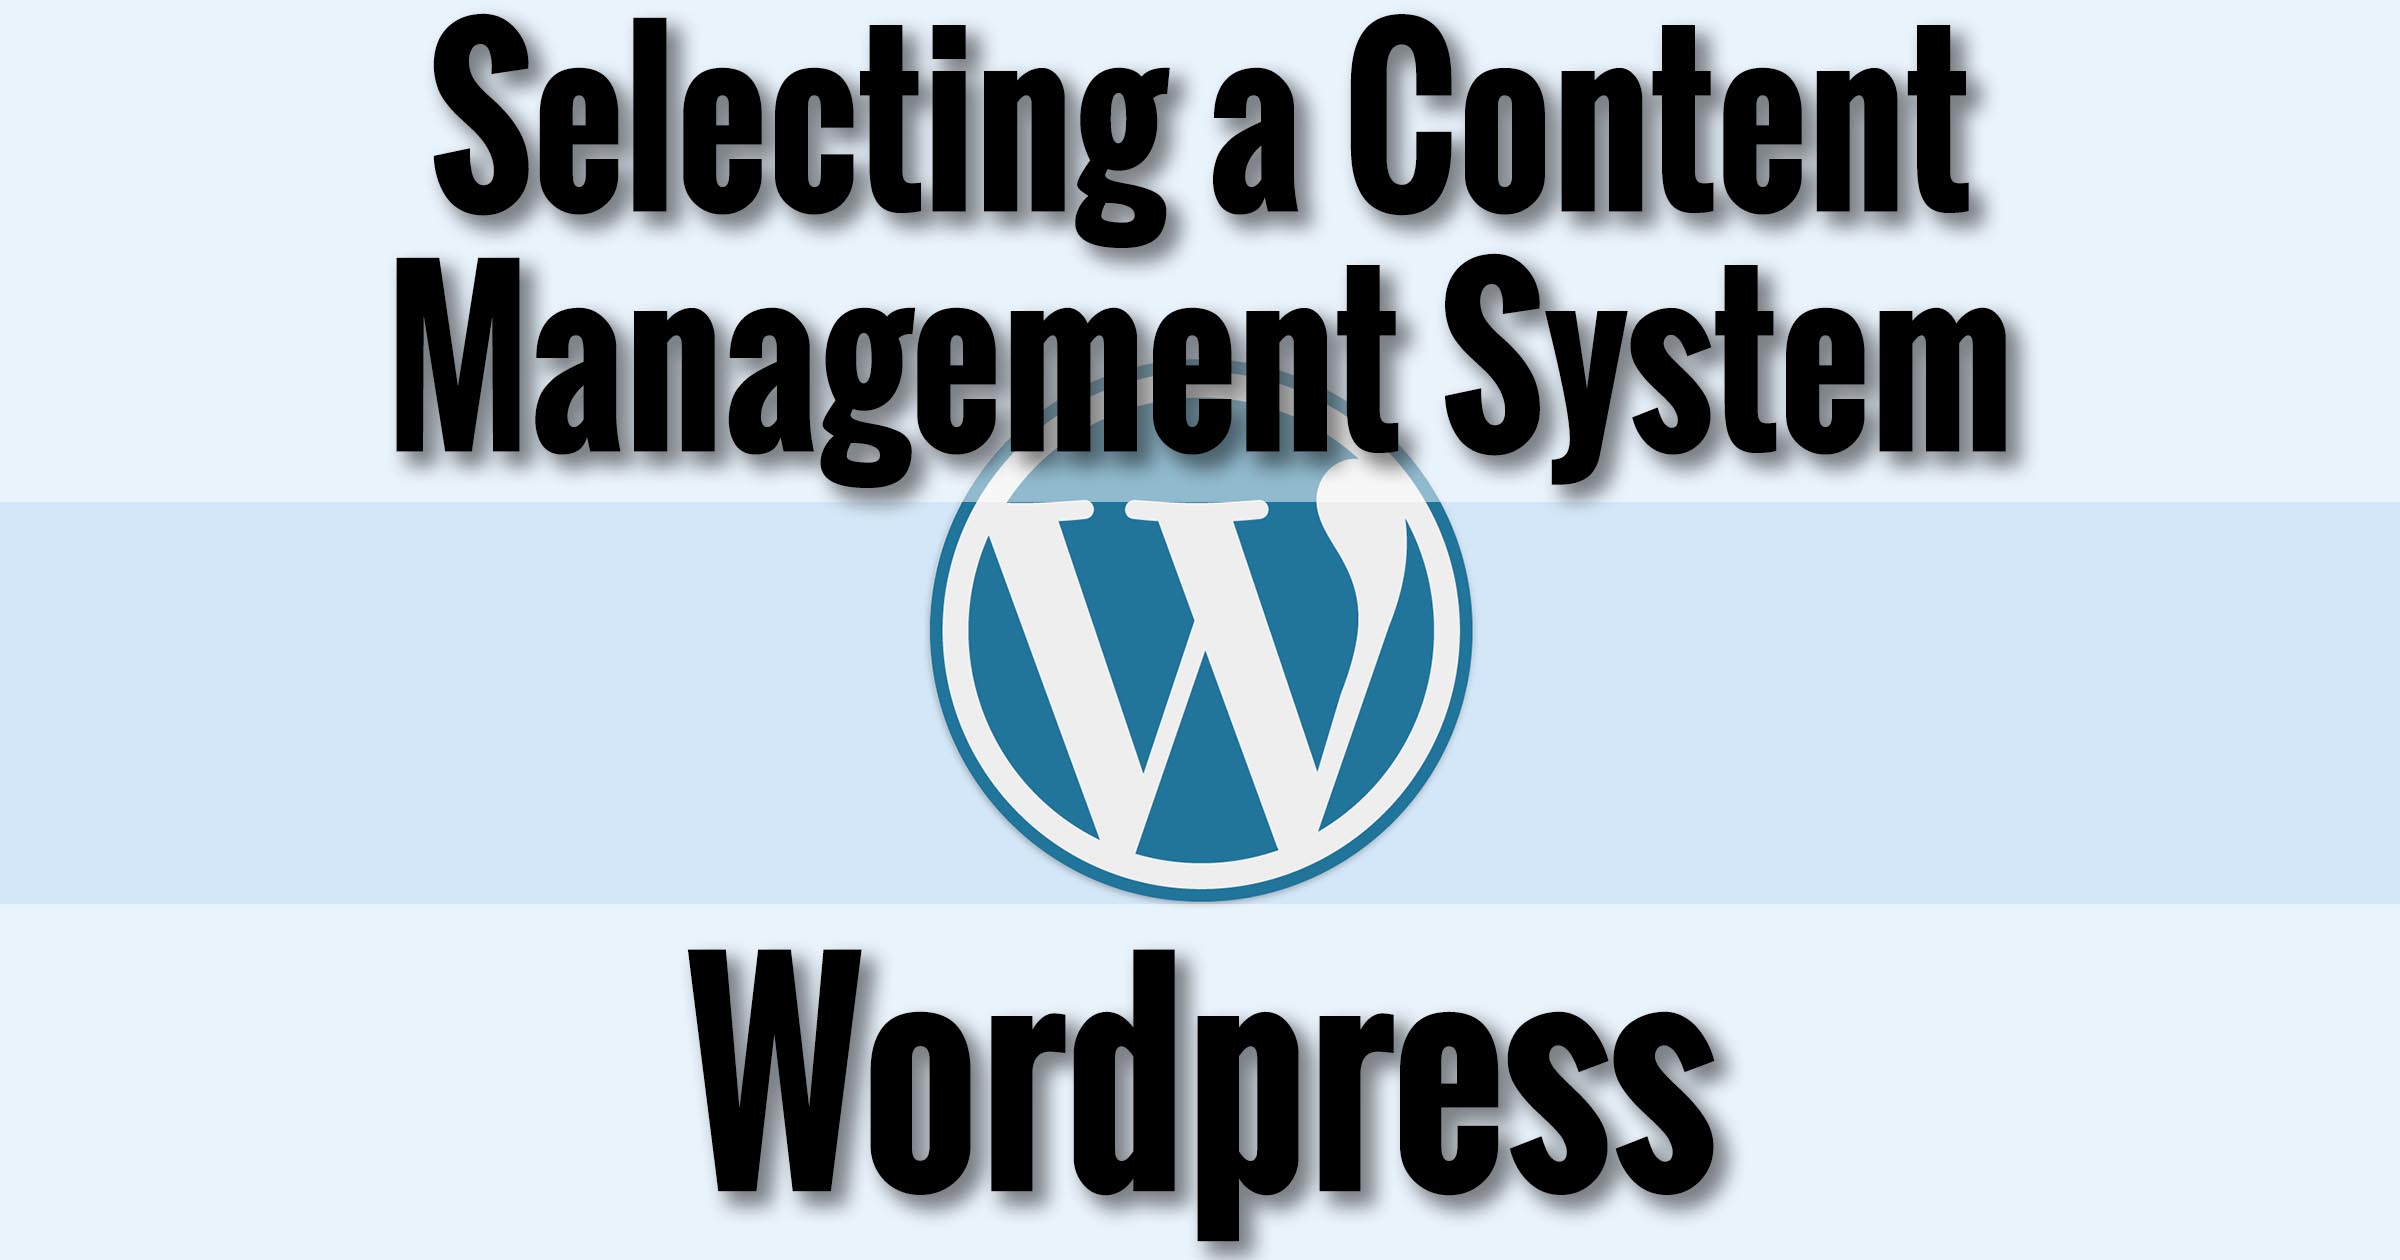 Selecting a Content Management System - Wordpress